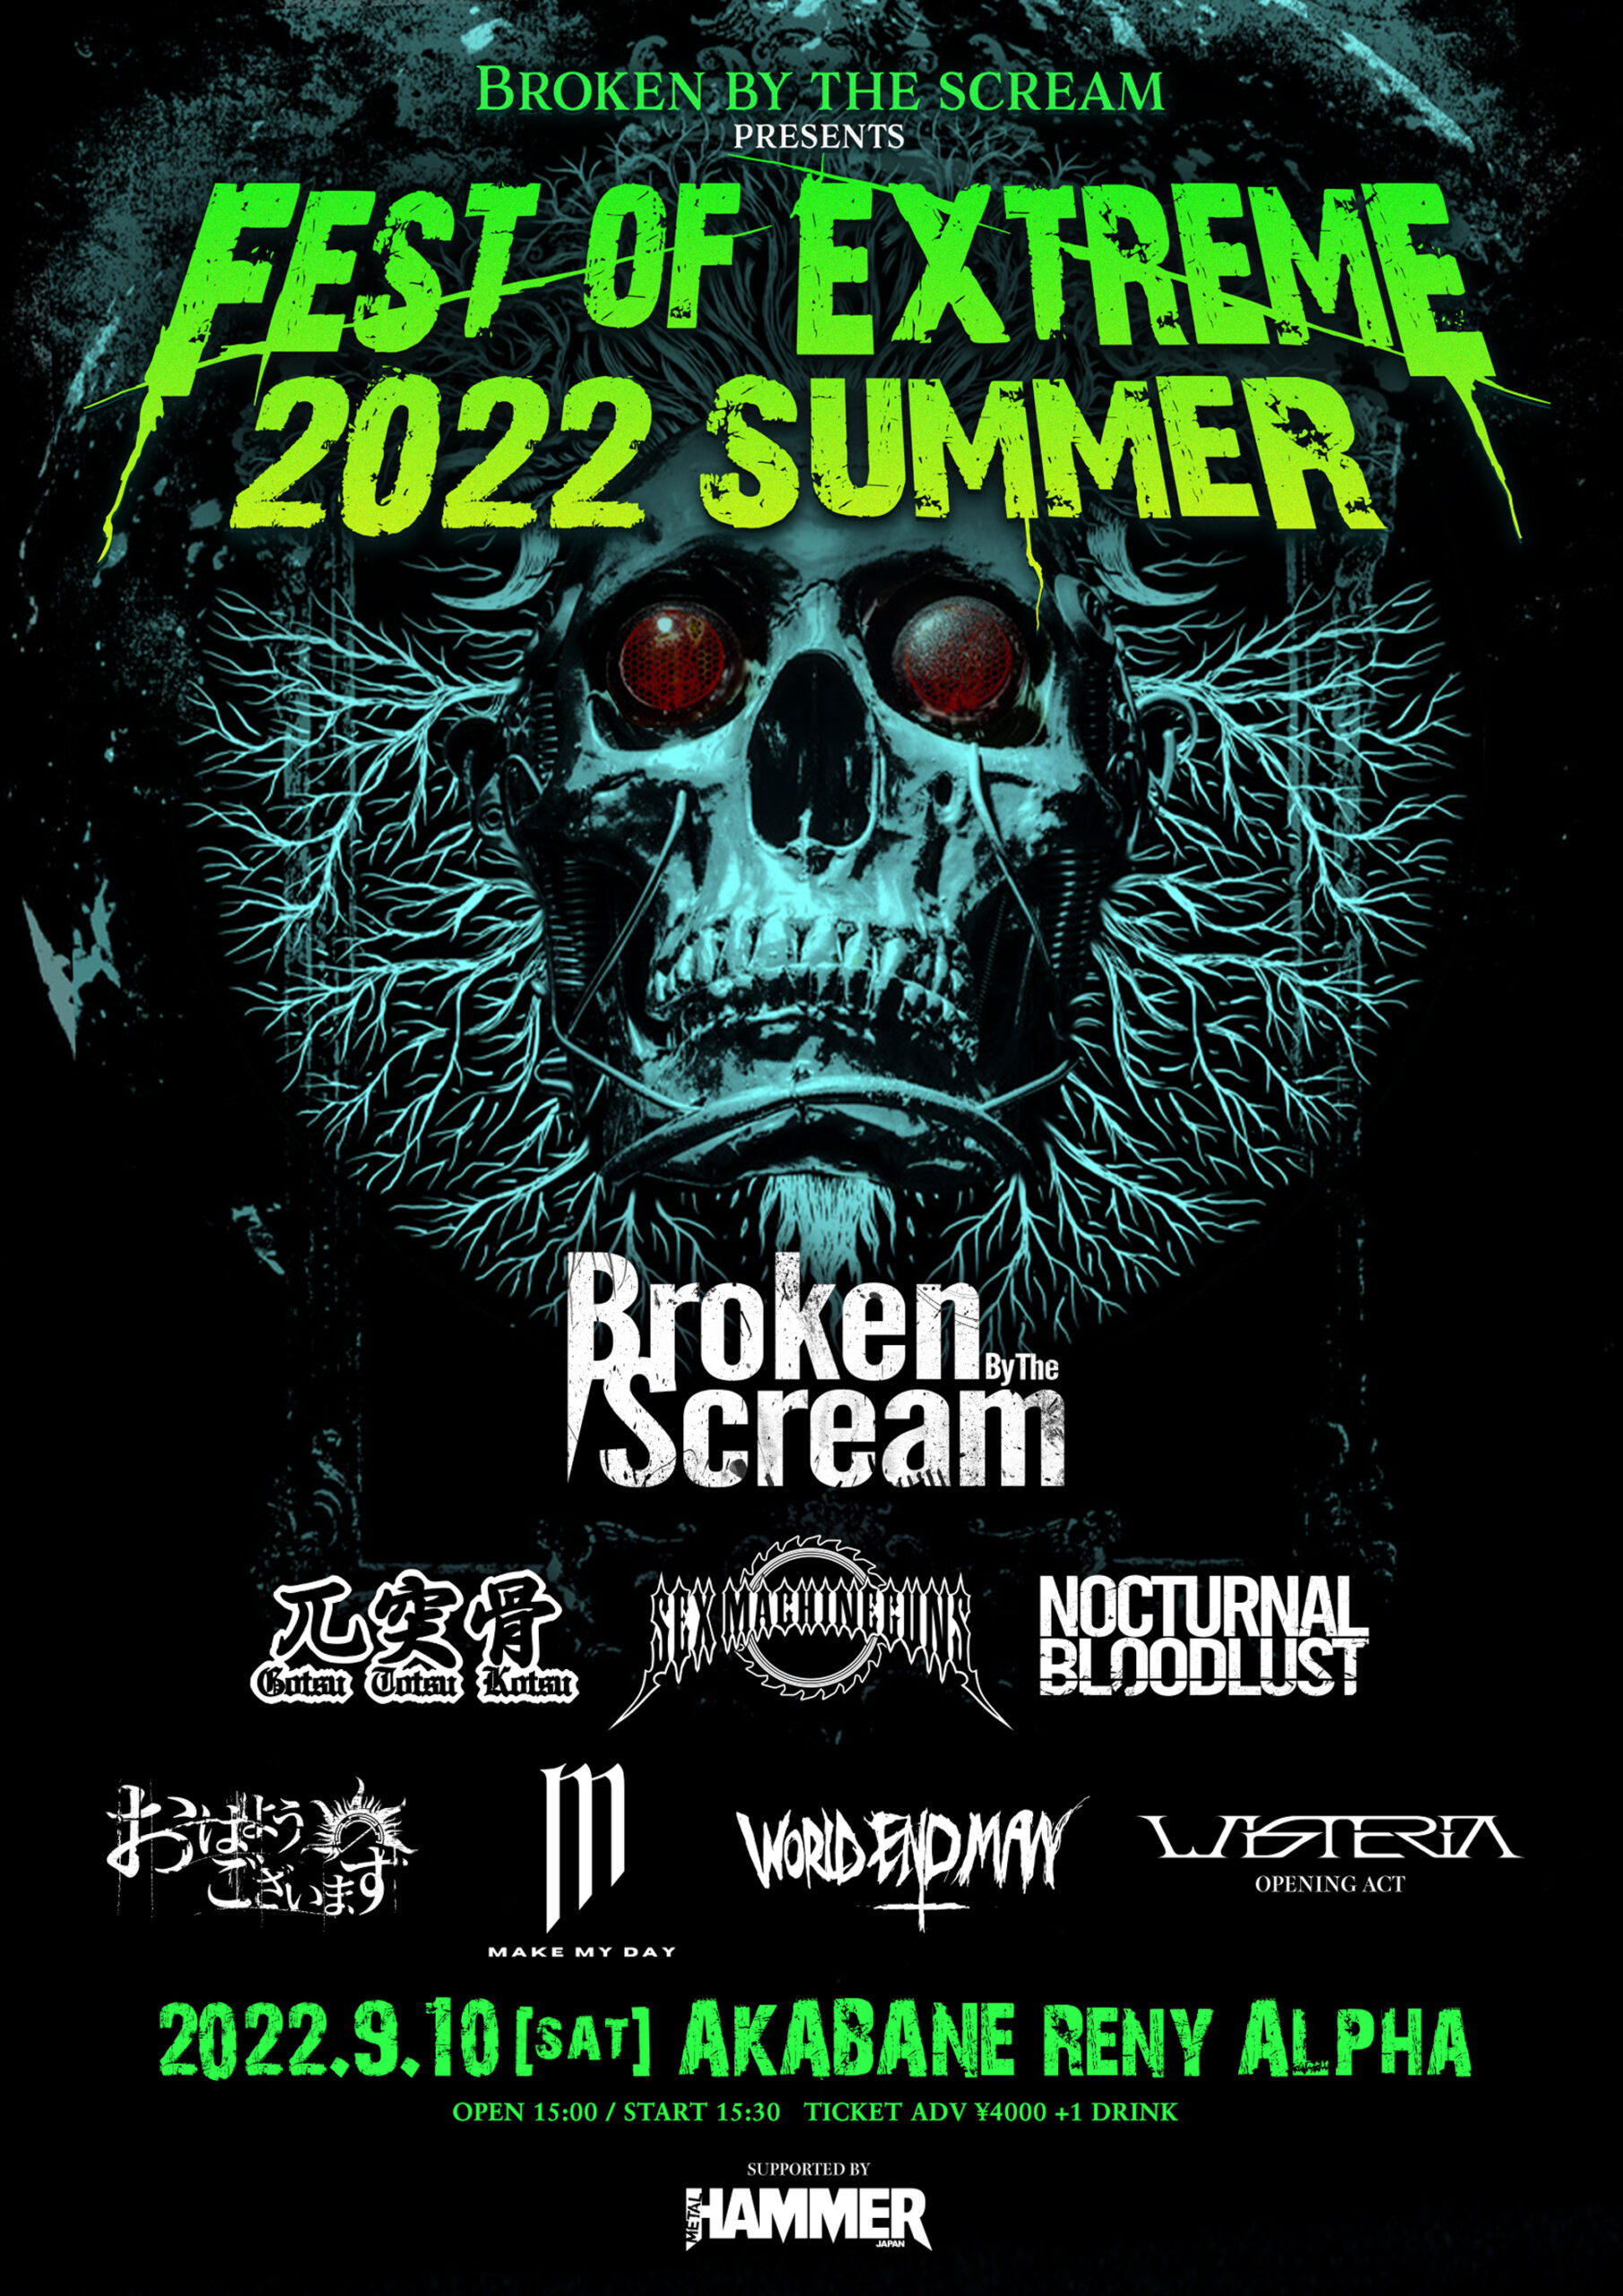 Broken By The Scream presents “FEST OF EXTREME 2022  Summer” 出演決定！